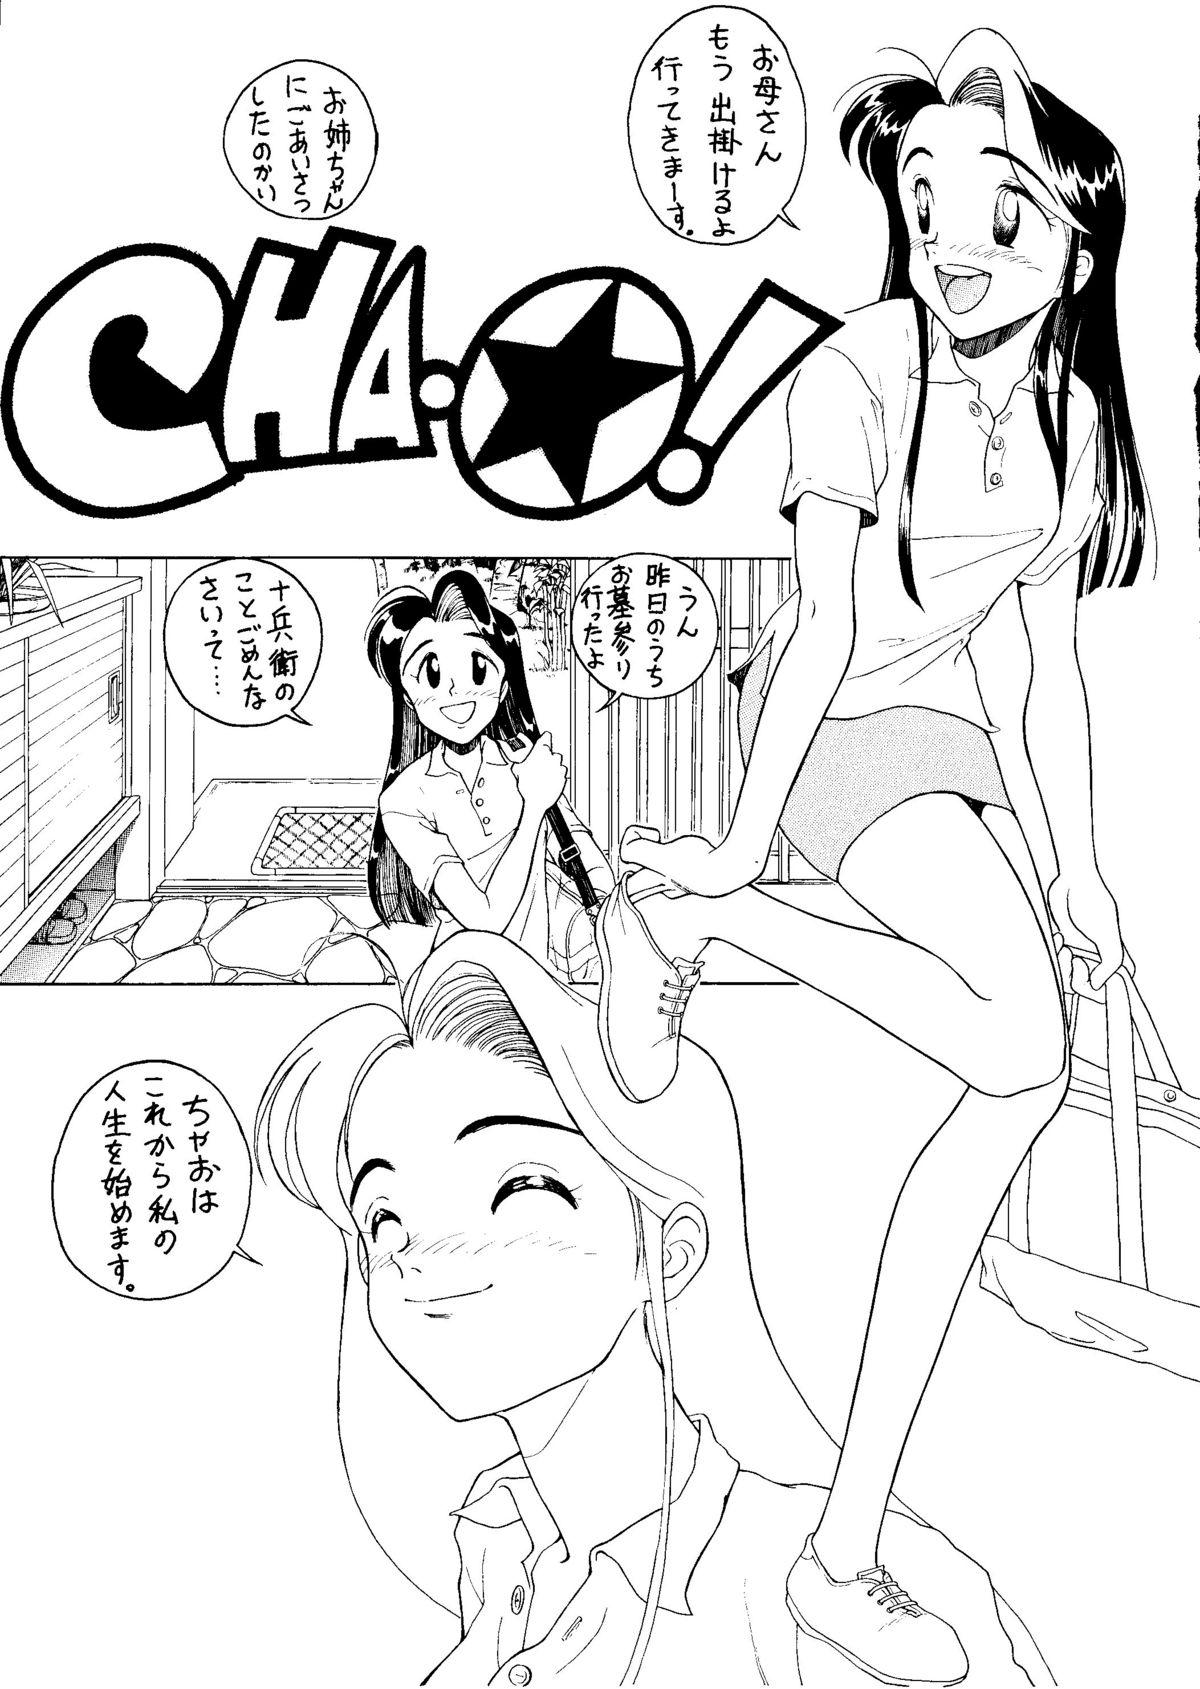 Black Girl NONTA Chao! Uptown Boys Hard Sex - Page 4